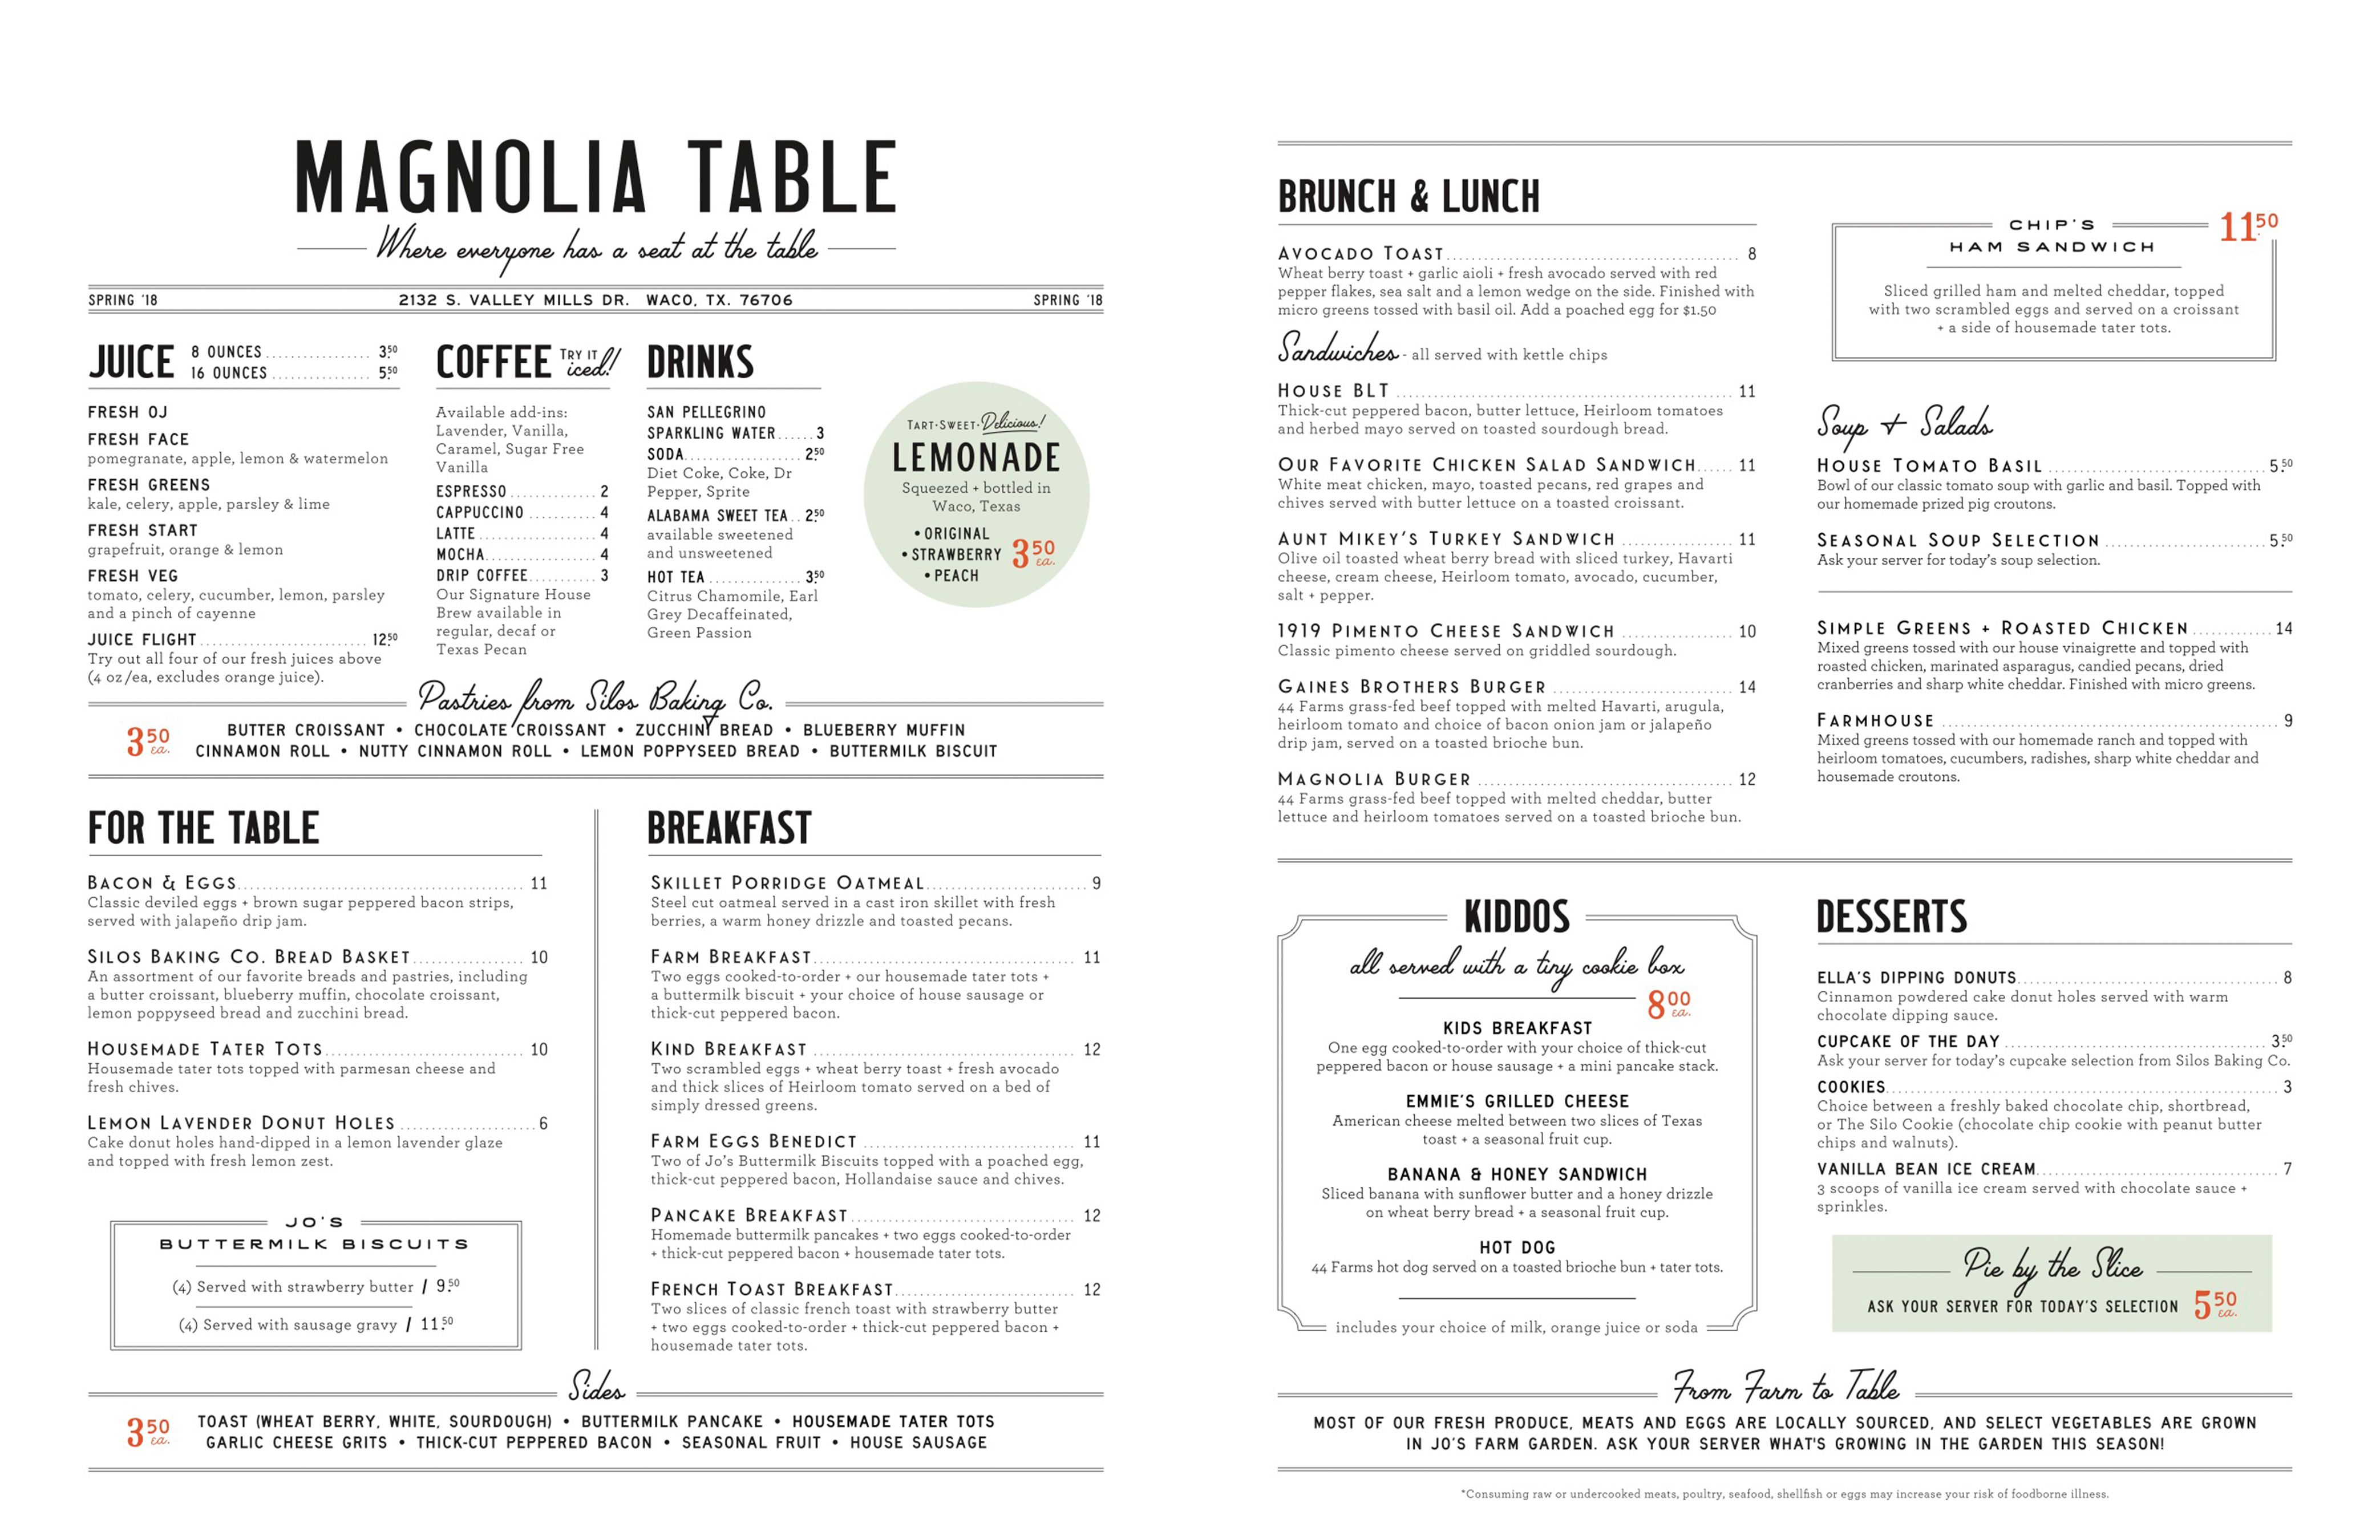 Menu for Magnolia Table restaurant in Waco by Chip and Joanna Gaines of Fixer Upper. #magnoliatable #menu #breakfast #restaurant